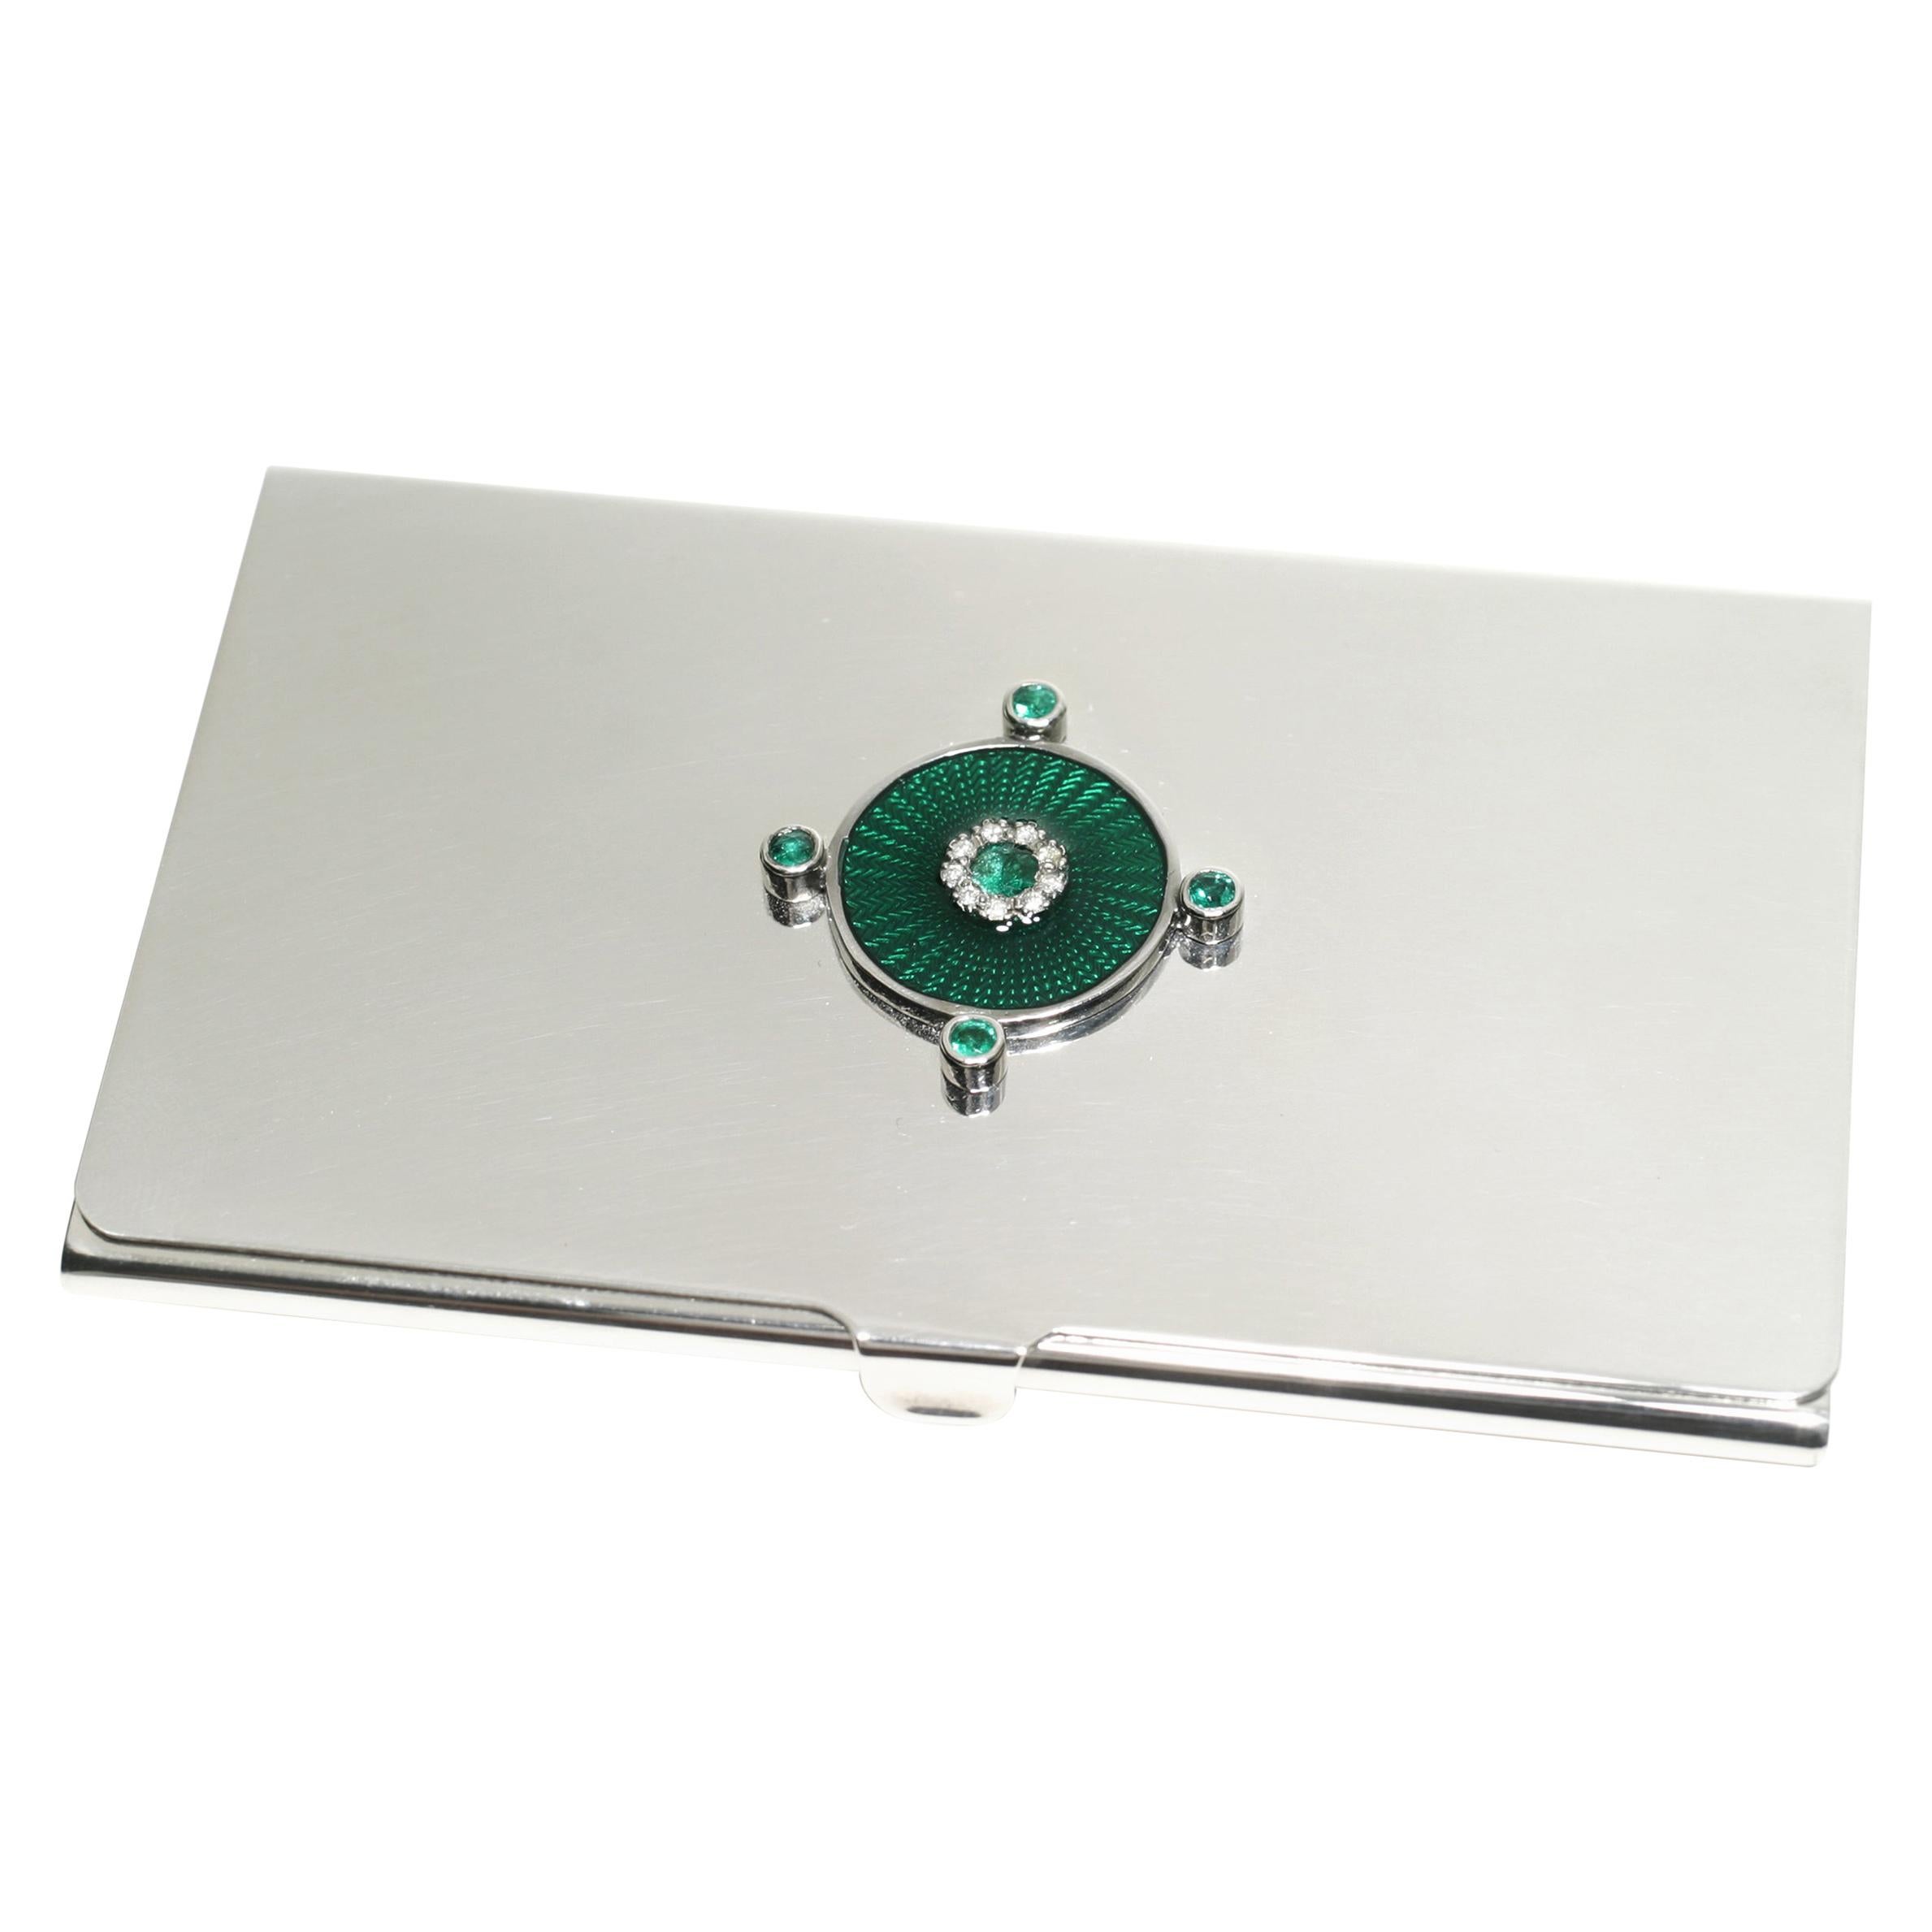 20th-century sterling silver Guilloché green enamel card case
Emerald weighing 0.70 carats
Diamonds weighing 0.15 carats
Handmade in Italy
The Ocie Minaudiere collection was created to incorporate precious gemstones into evening luxury